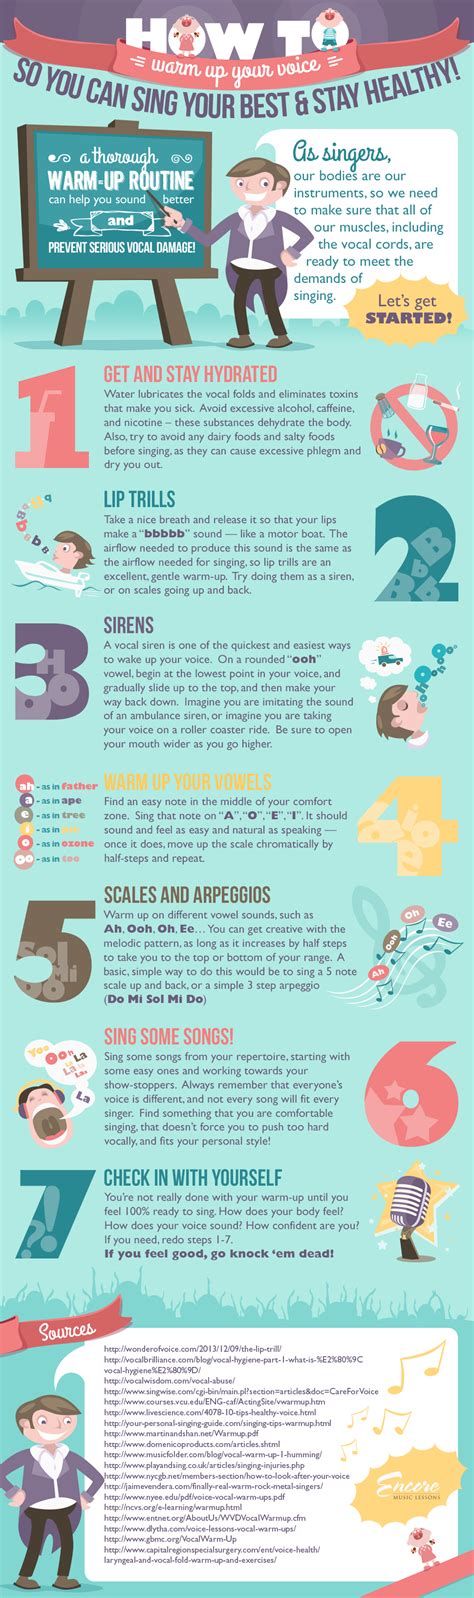 Infographic How To Warm Up Your Voice To Sing Your Best And Stay Healthy